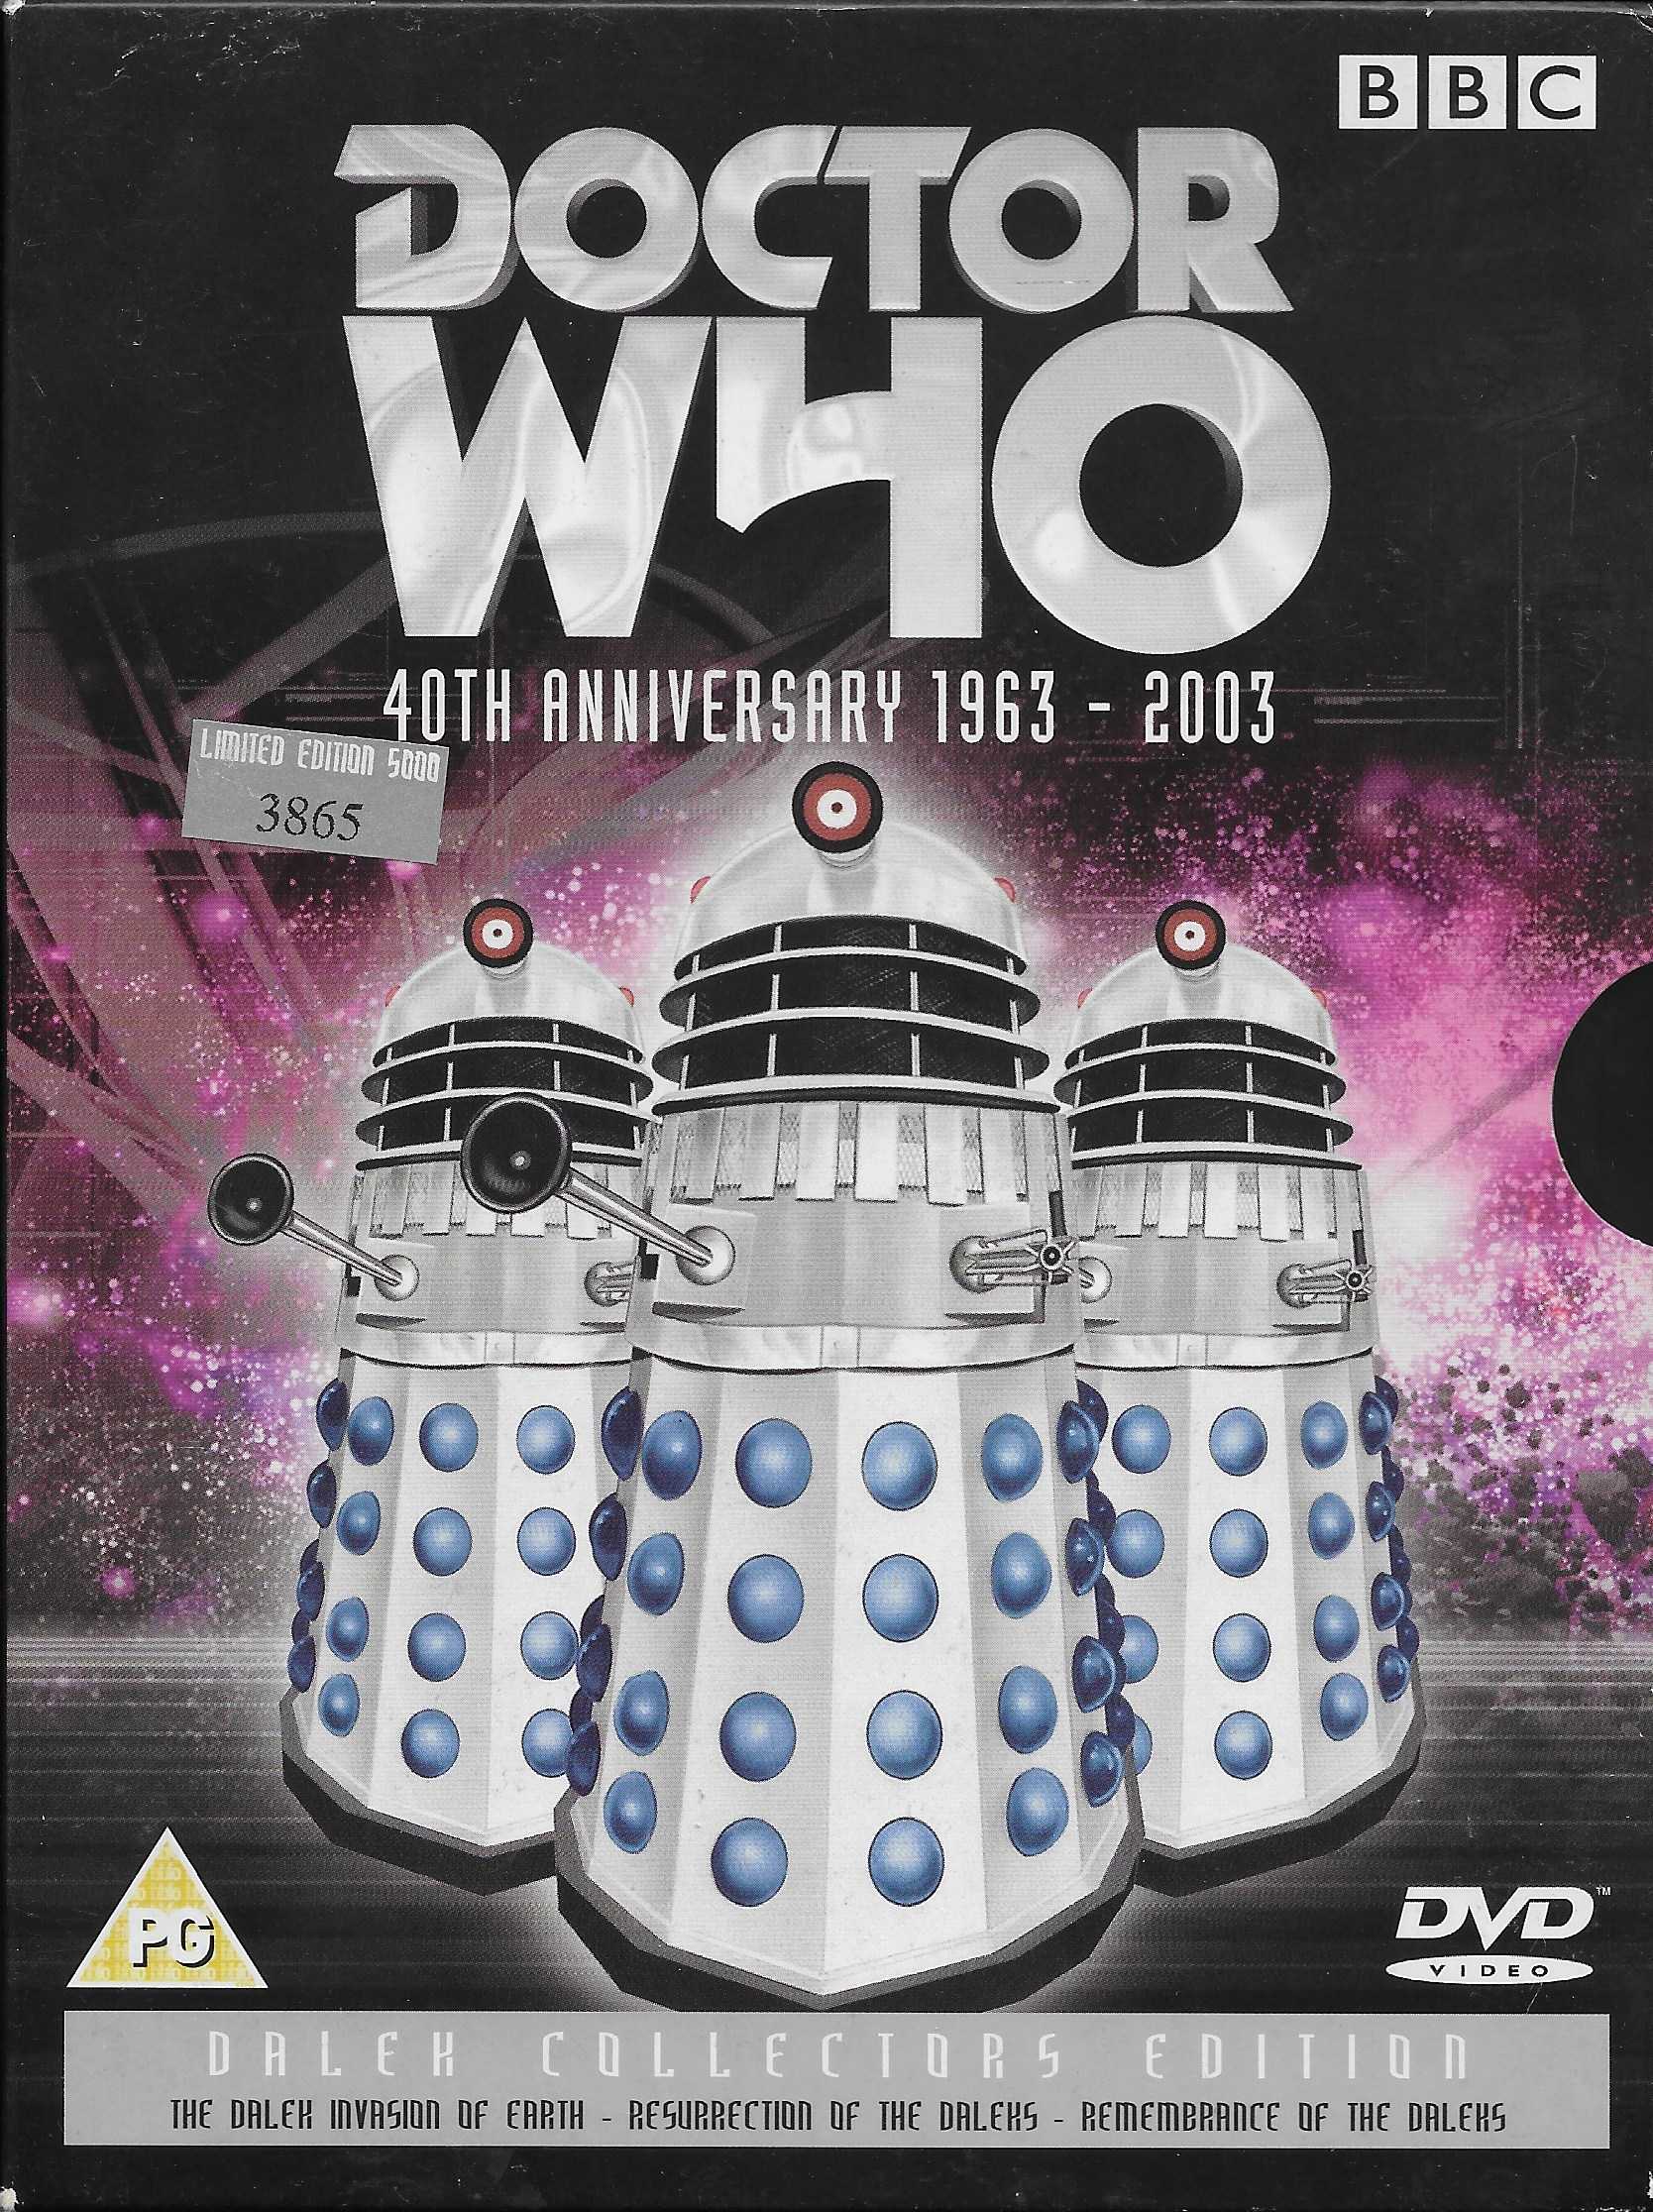 Picture of BBCDVD 1384 Doctor Who - Dalek collectors edition - Limited edition by artist Terry Nation / Eric Saward / Ben Aaronovitch from the BBC dvds - Records and Tapes library